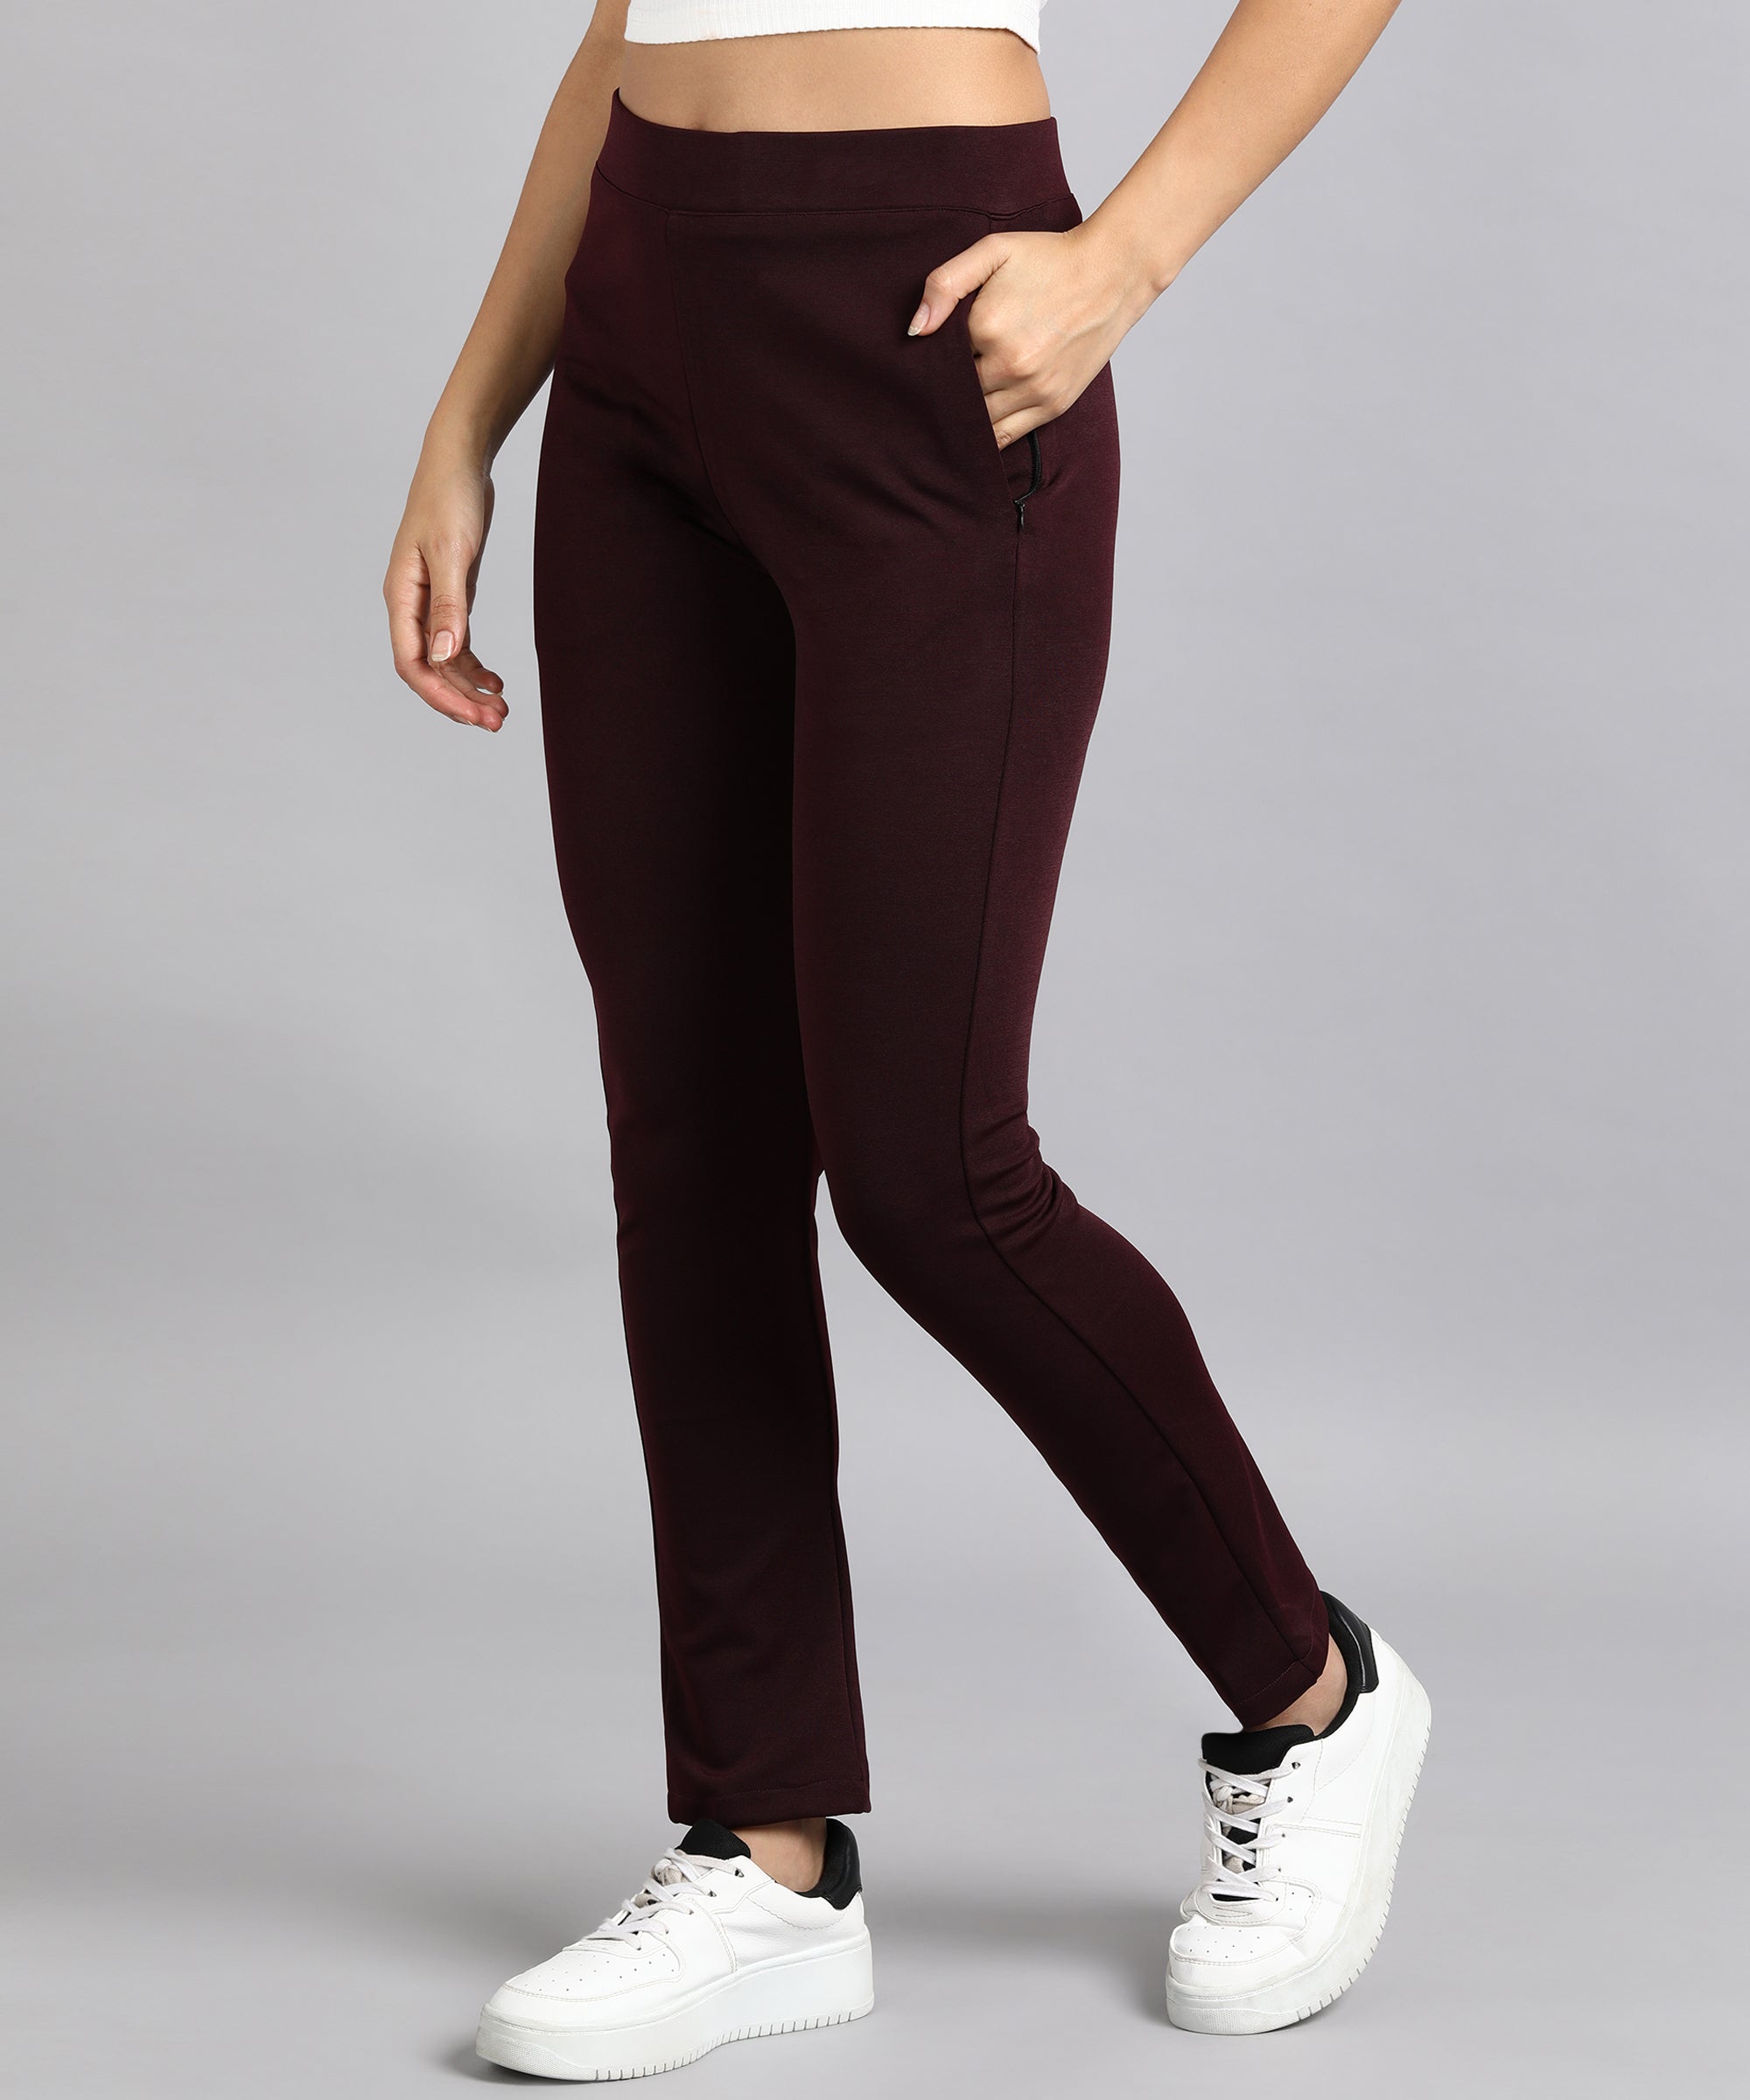 Cigarette Trousers Set - Buy Cigarette Trousers Set online in India